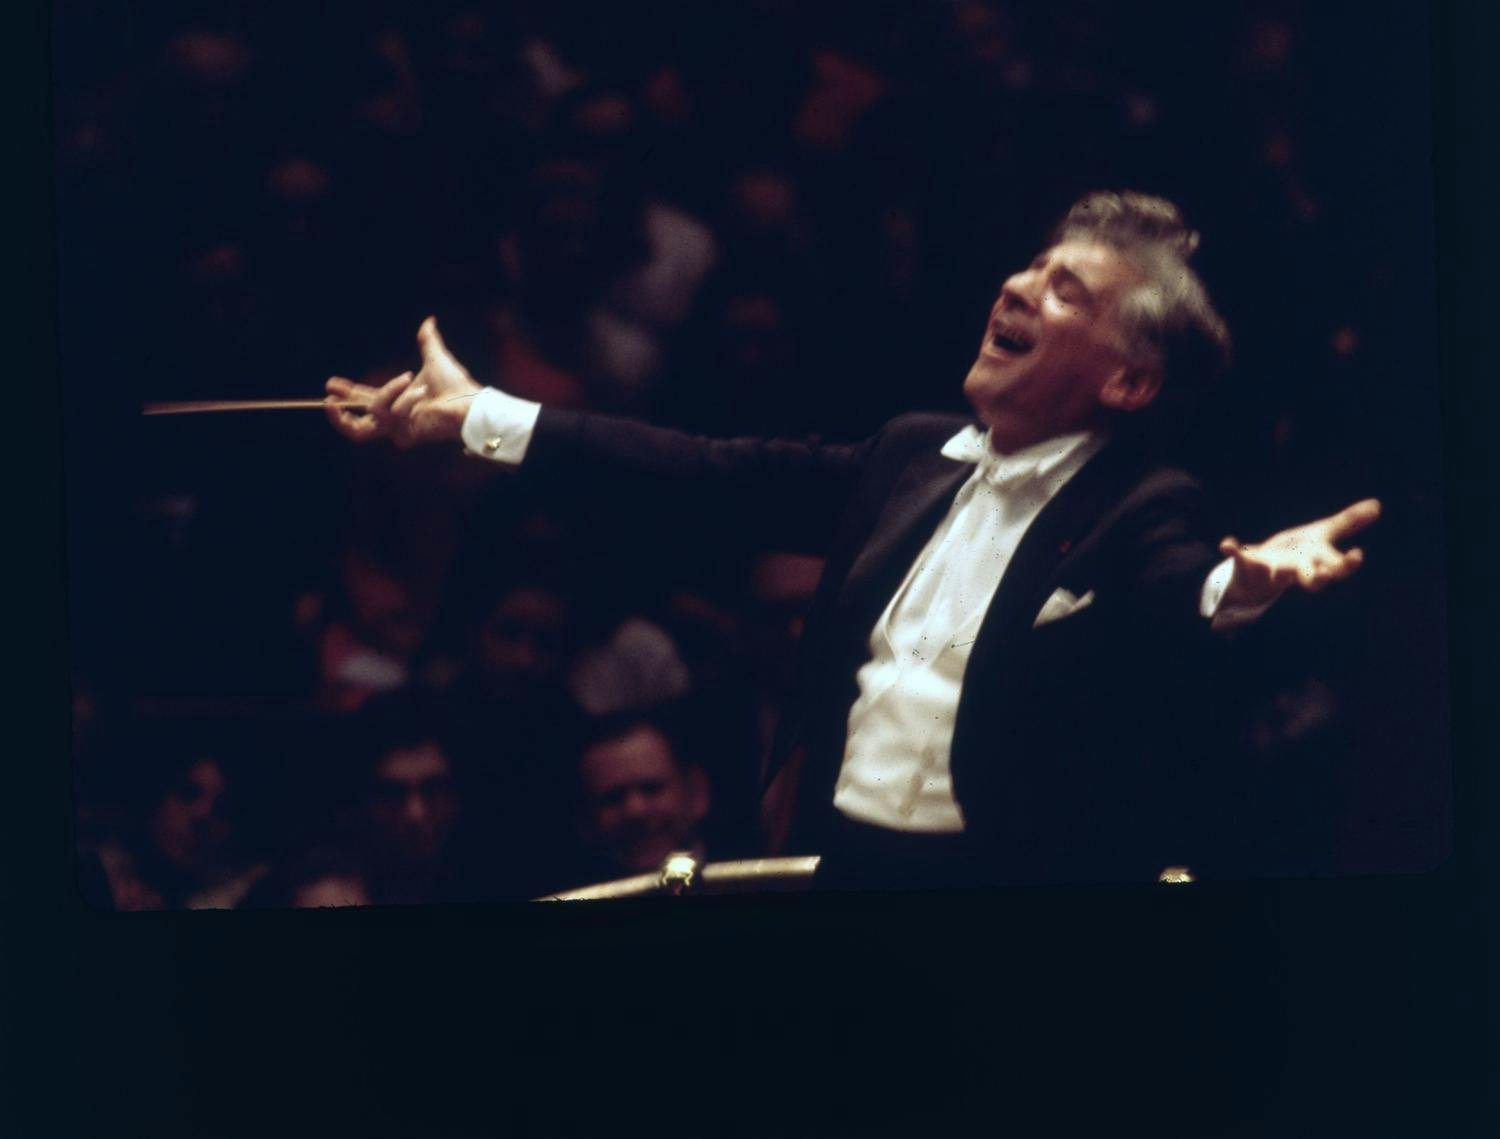 Looking Back at the Legacy of Composer Leonard Bernstein